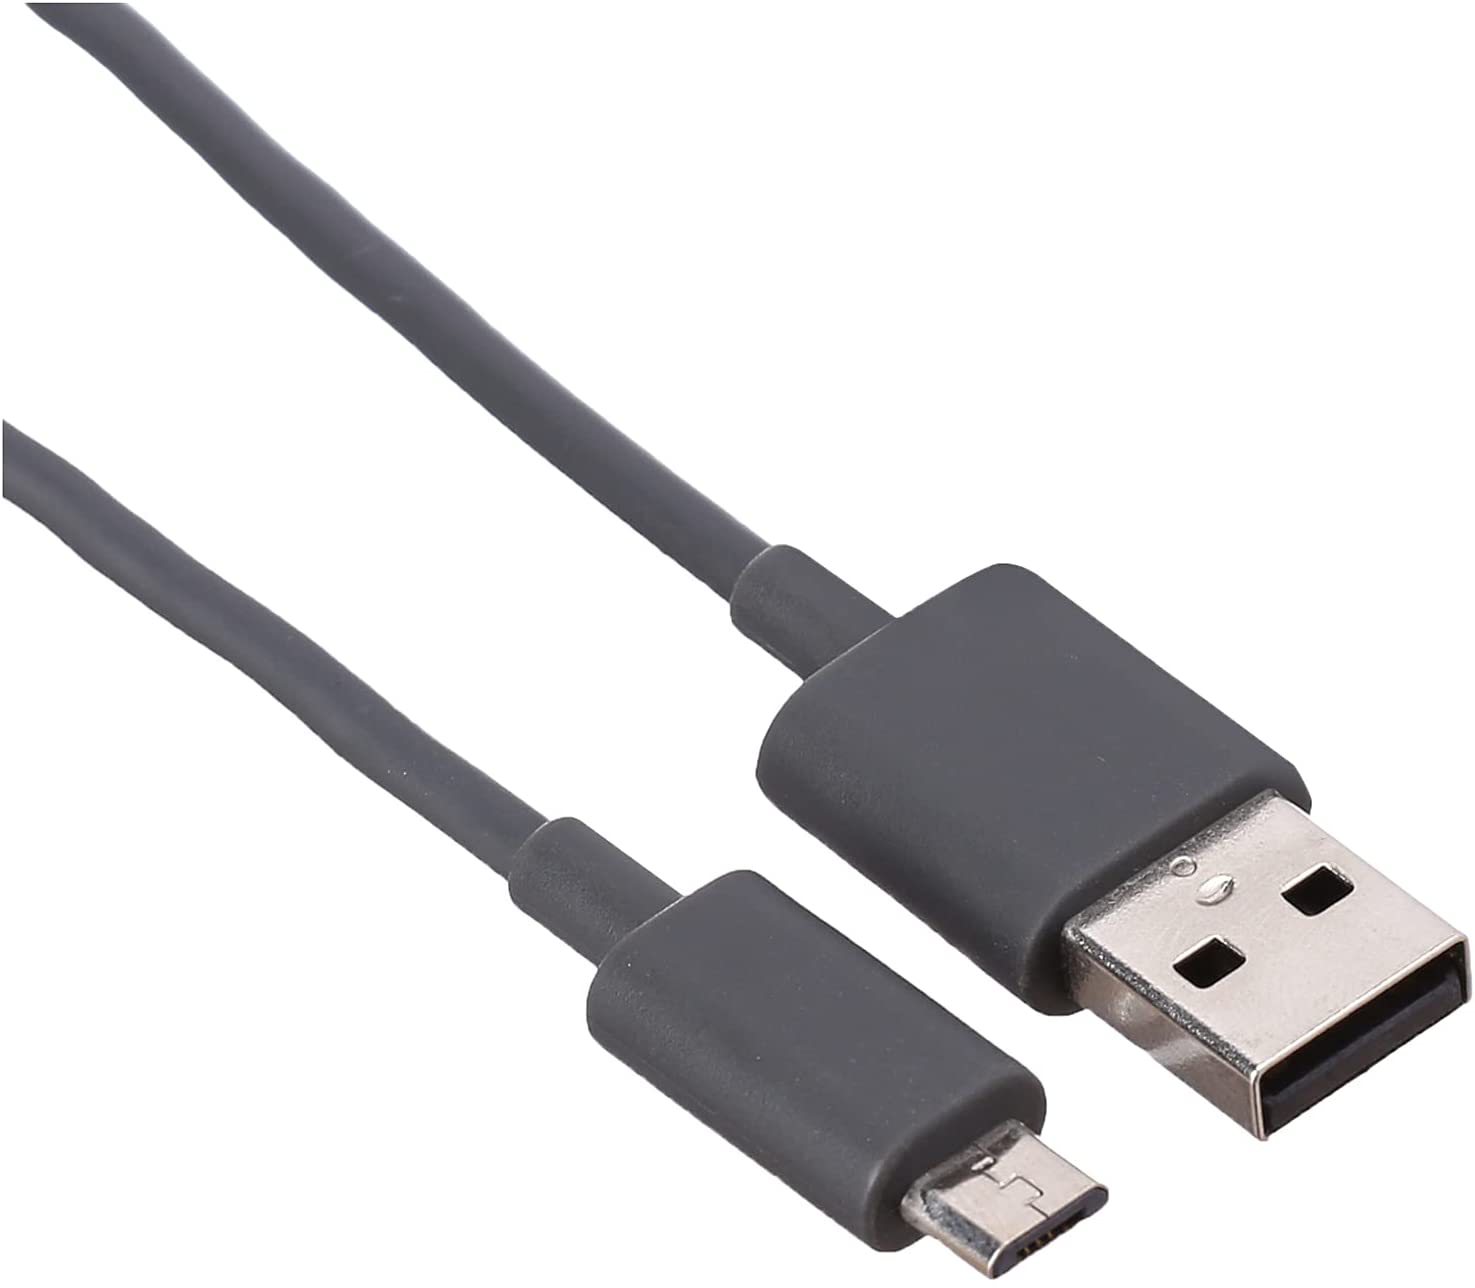 Keendex Micro USB Charging And Data Transfer Cable, 1.5 M, Grey - Kx2345